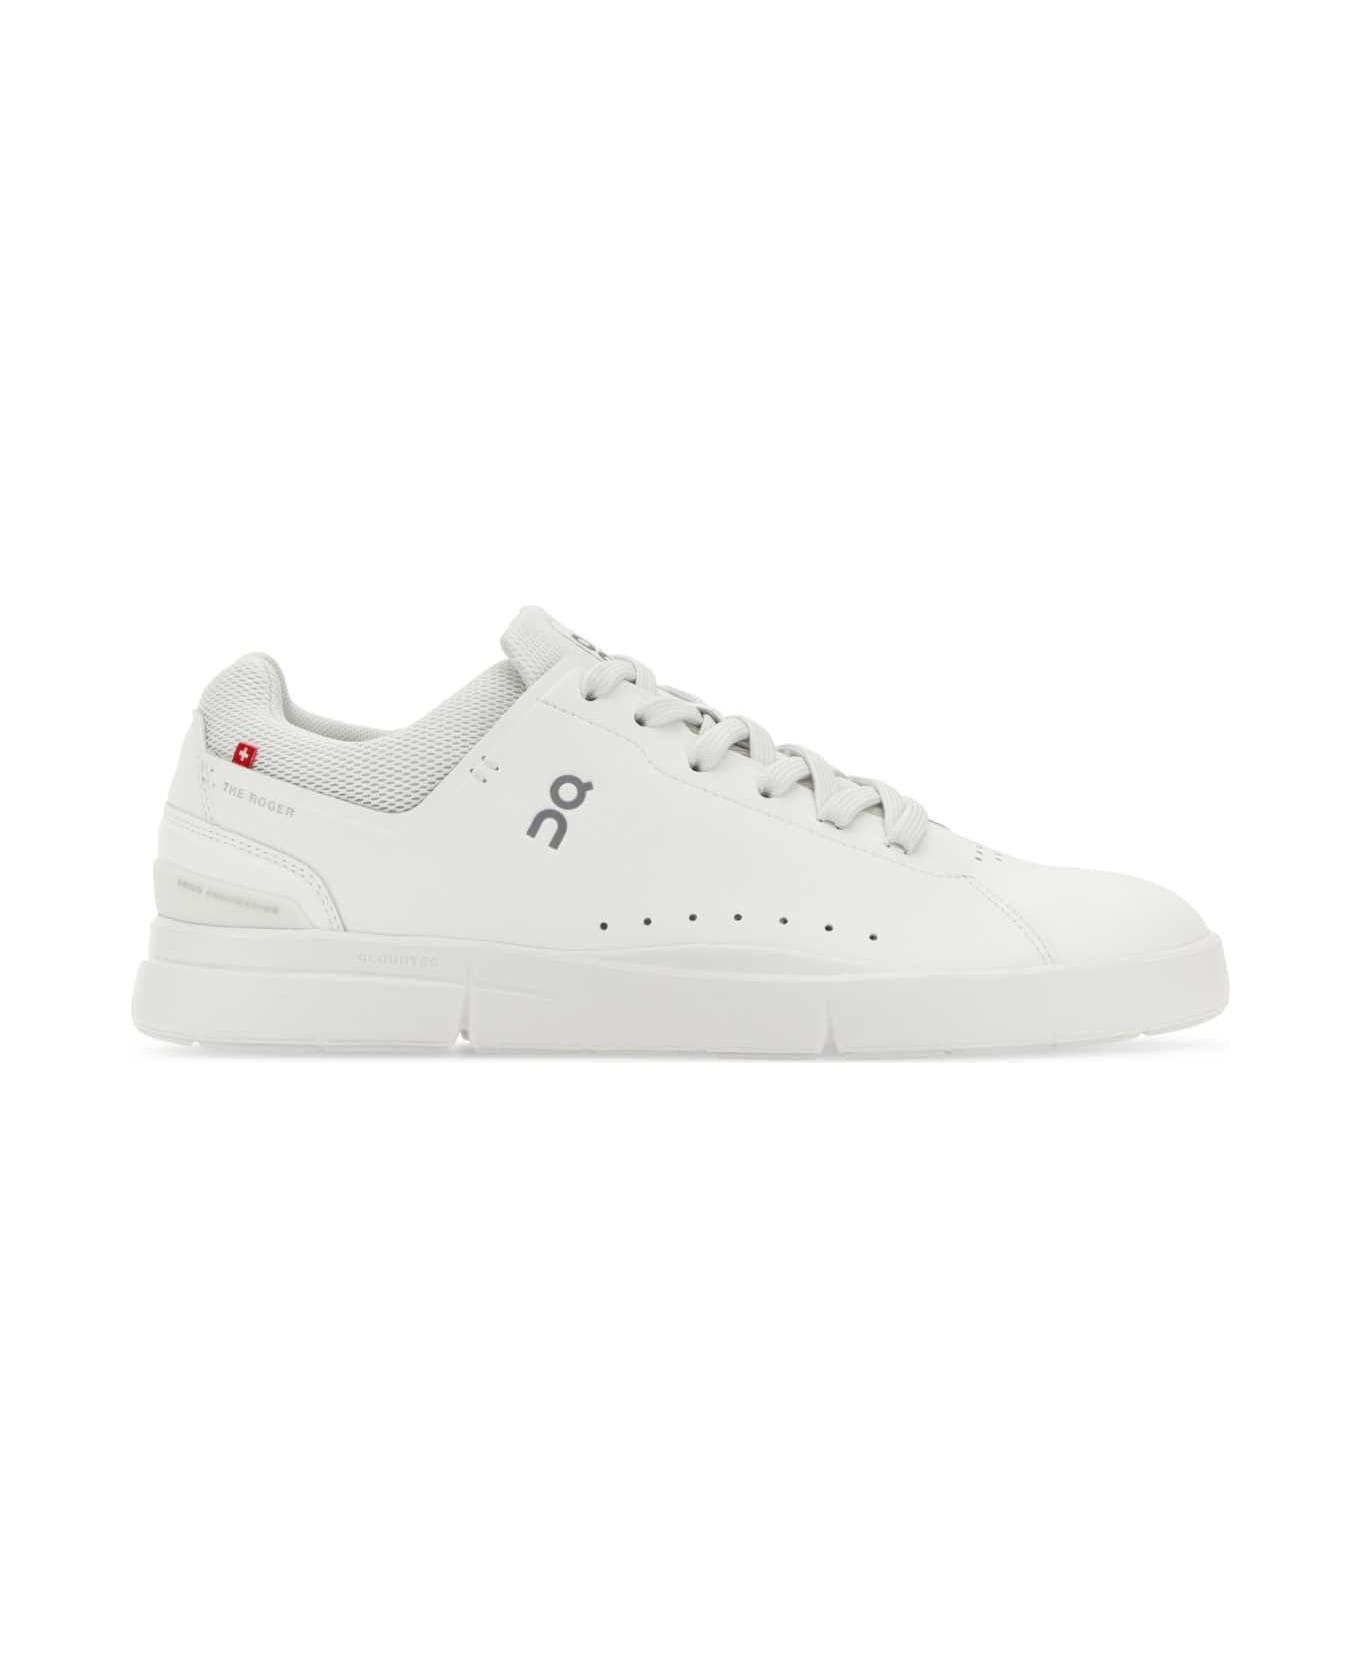 ON White Synthetic Leather And Mesh The Roger Advantage Sneakers - ALLWHITE スニーカー